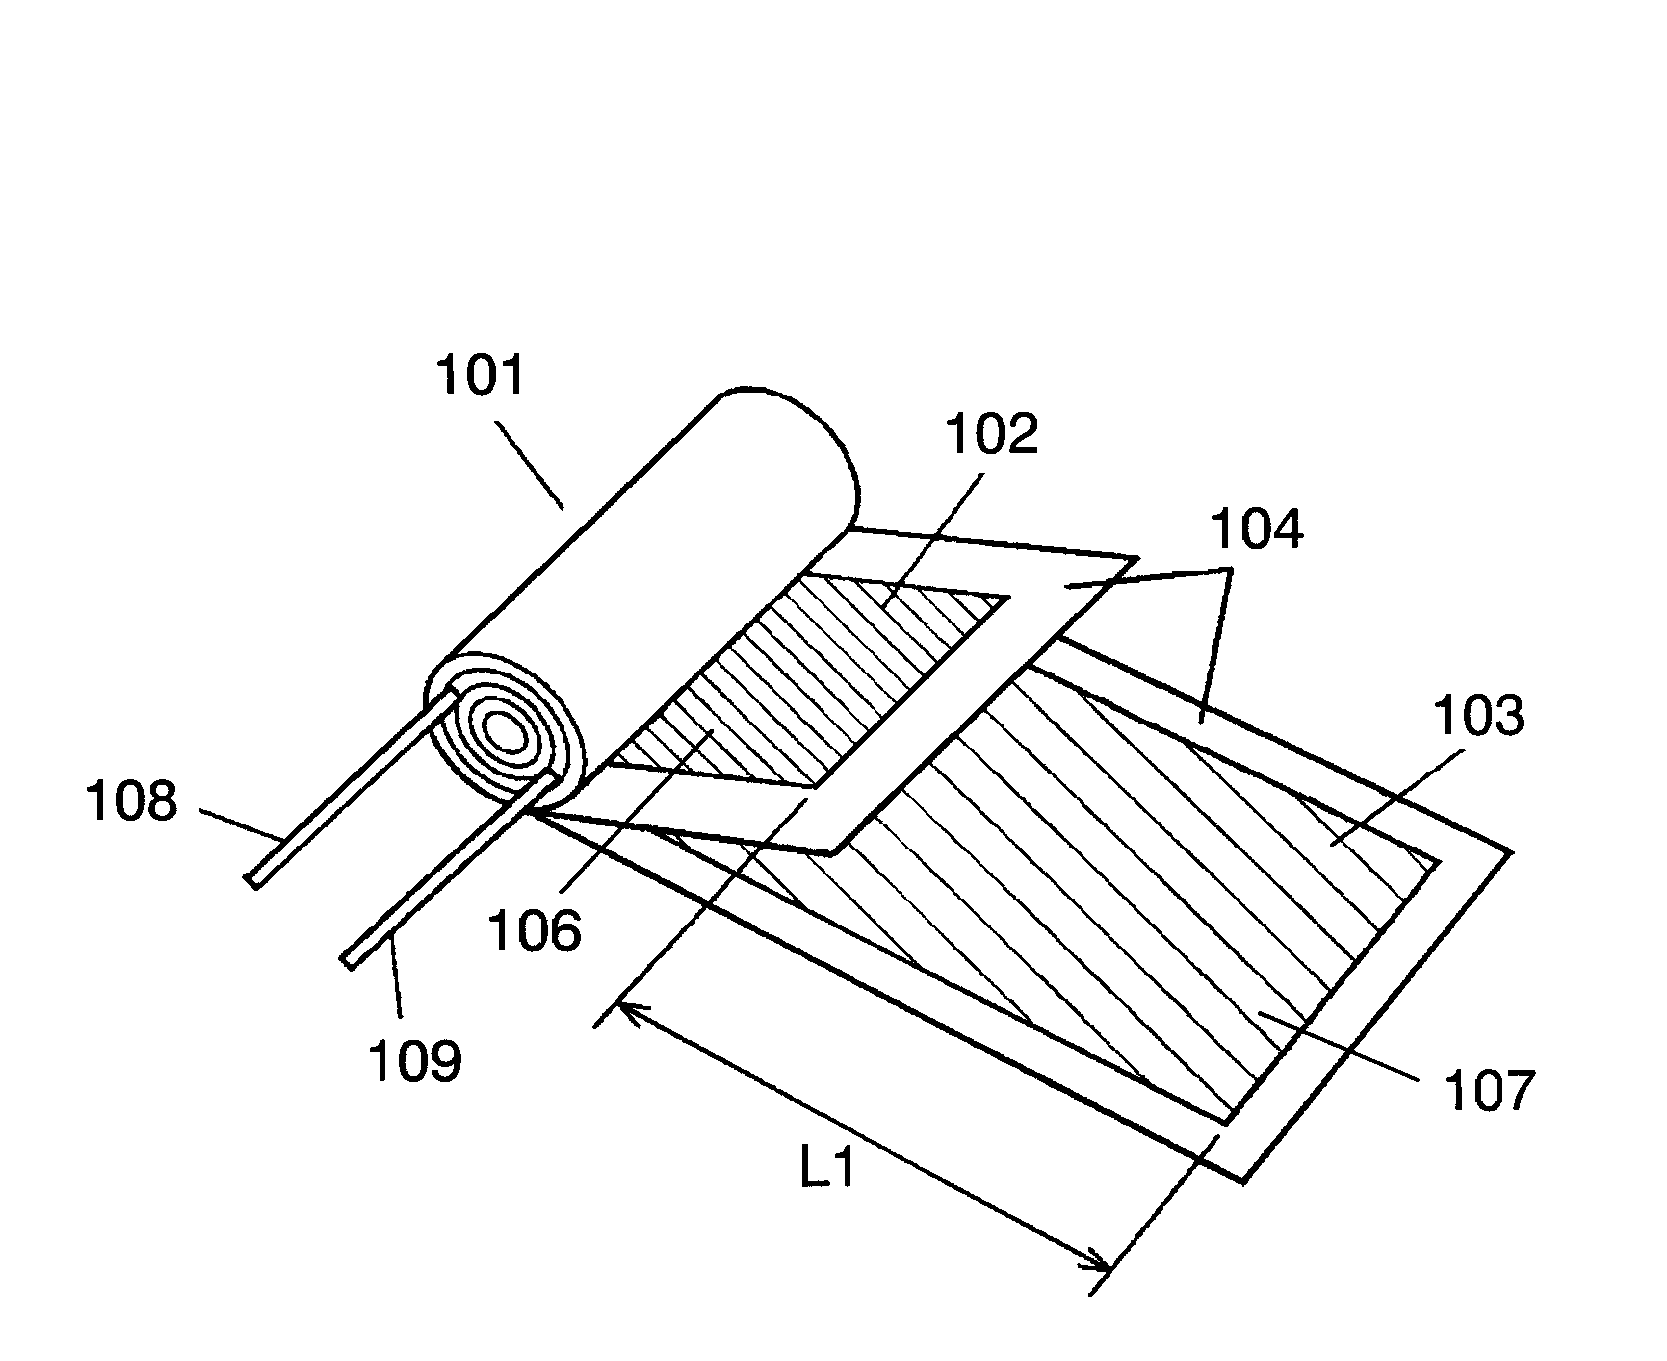 Wound electric double-layer capacitor